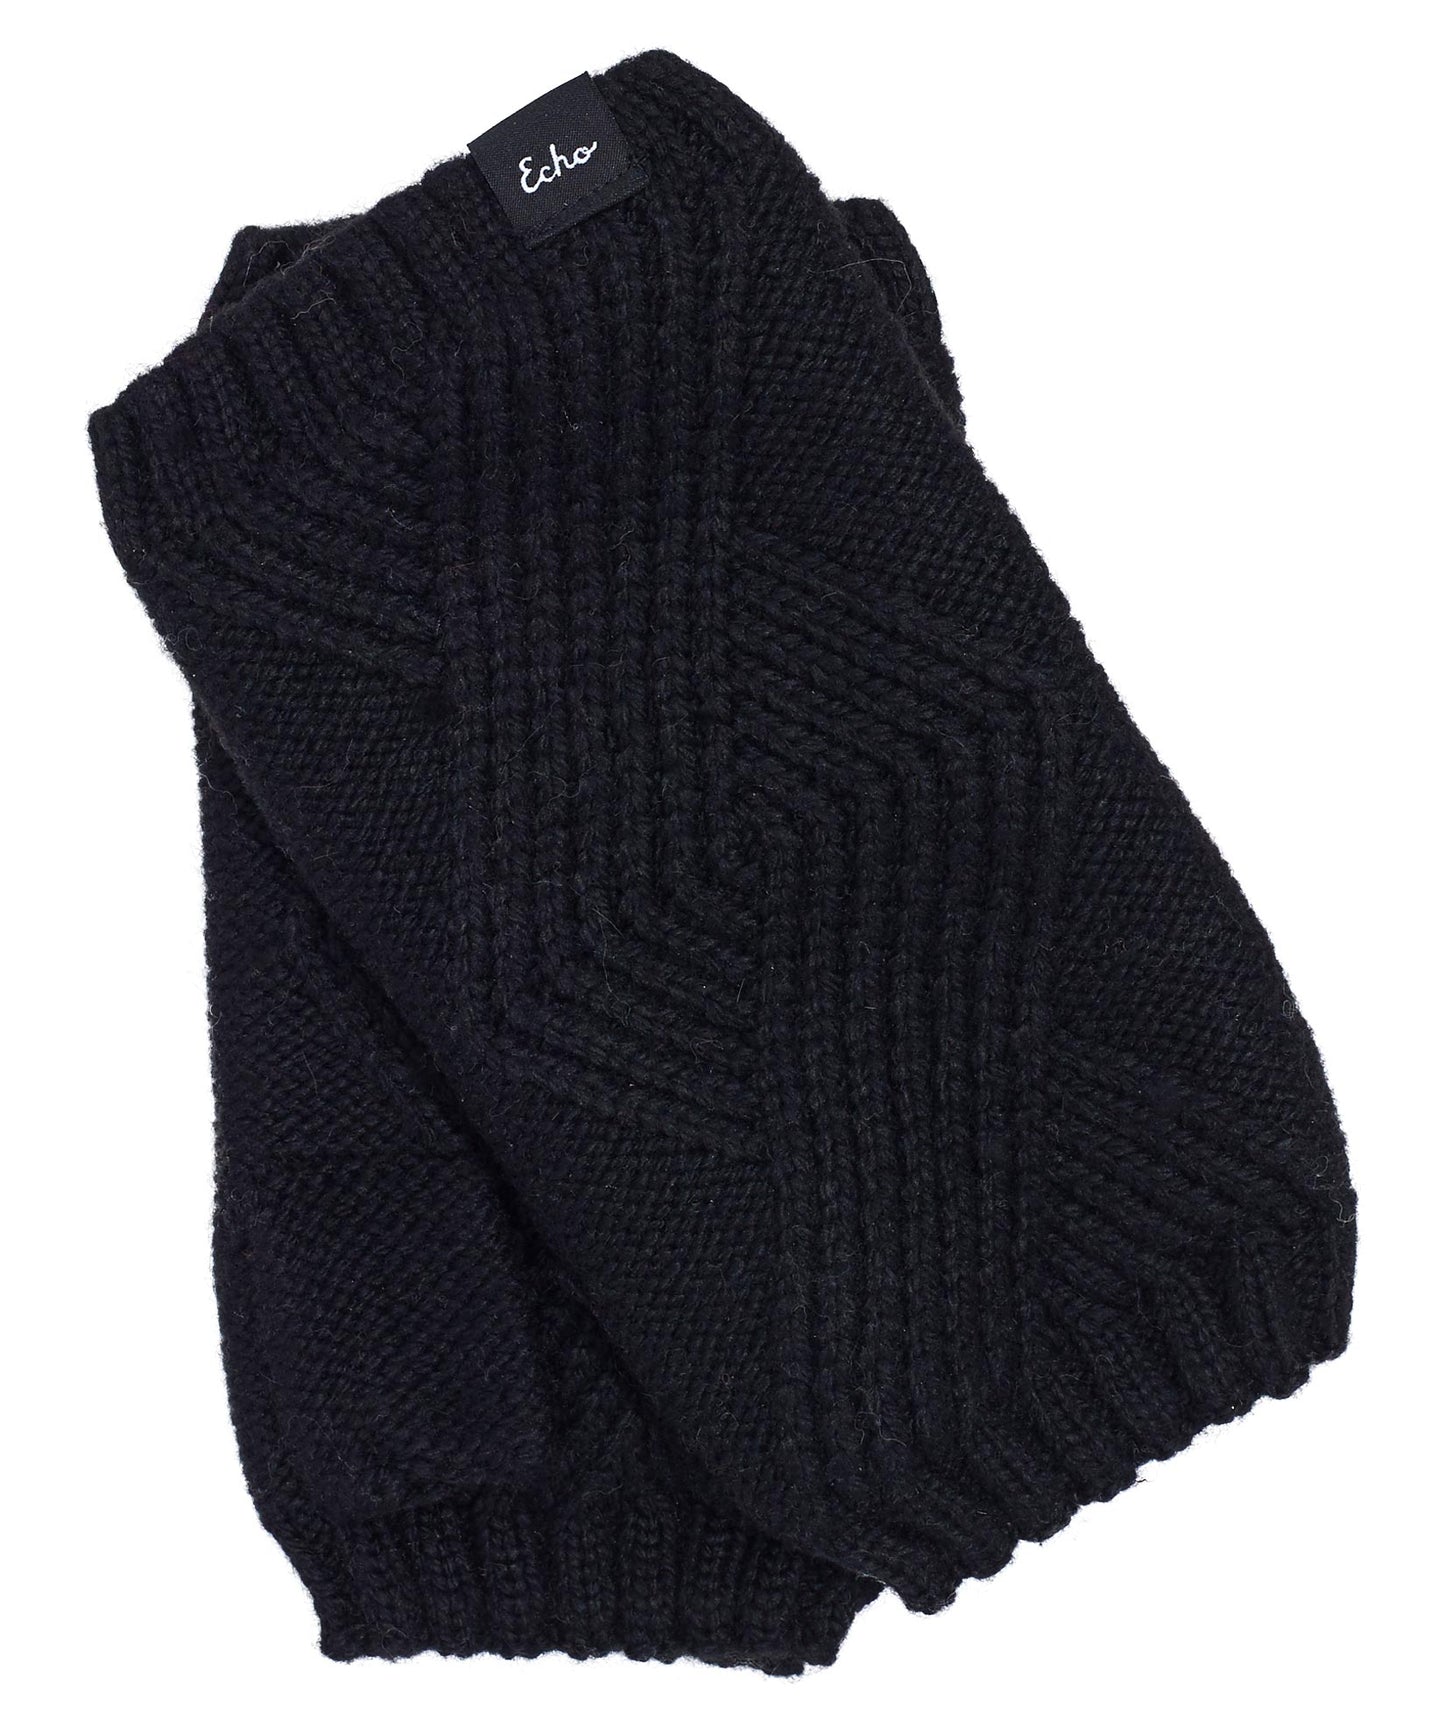 Recycled Cable Fingerless Glove in color Black